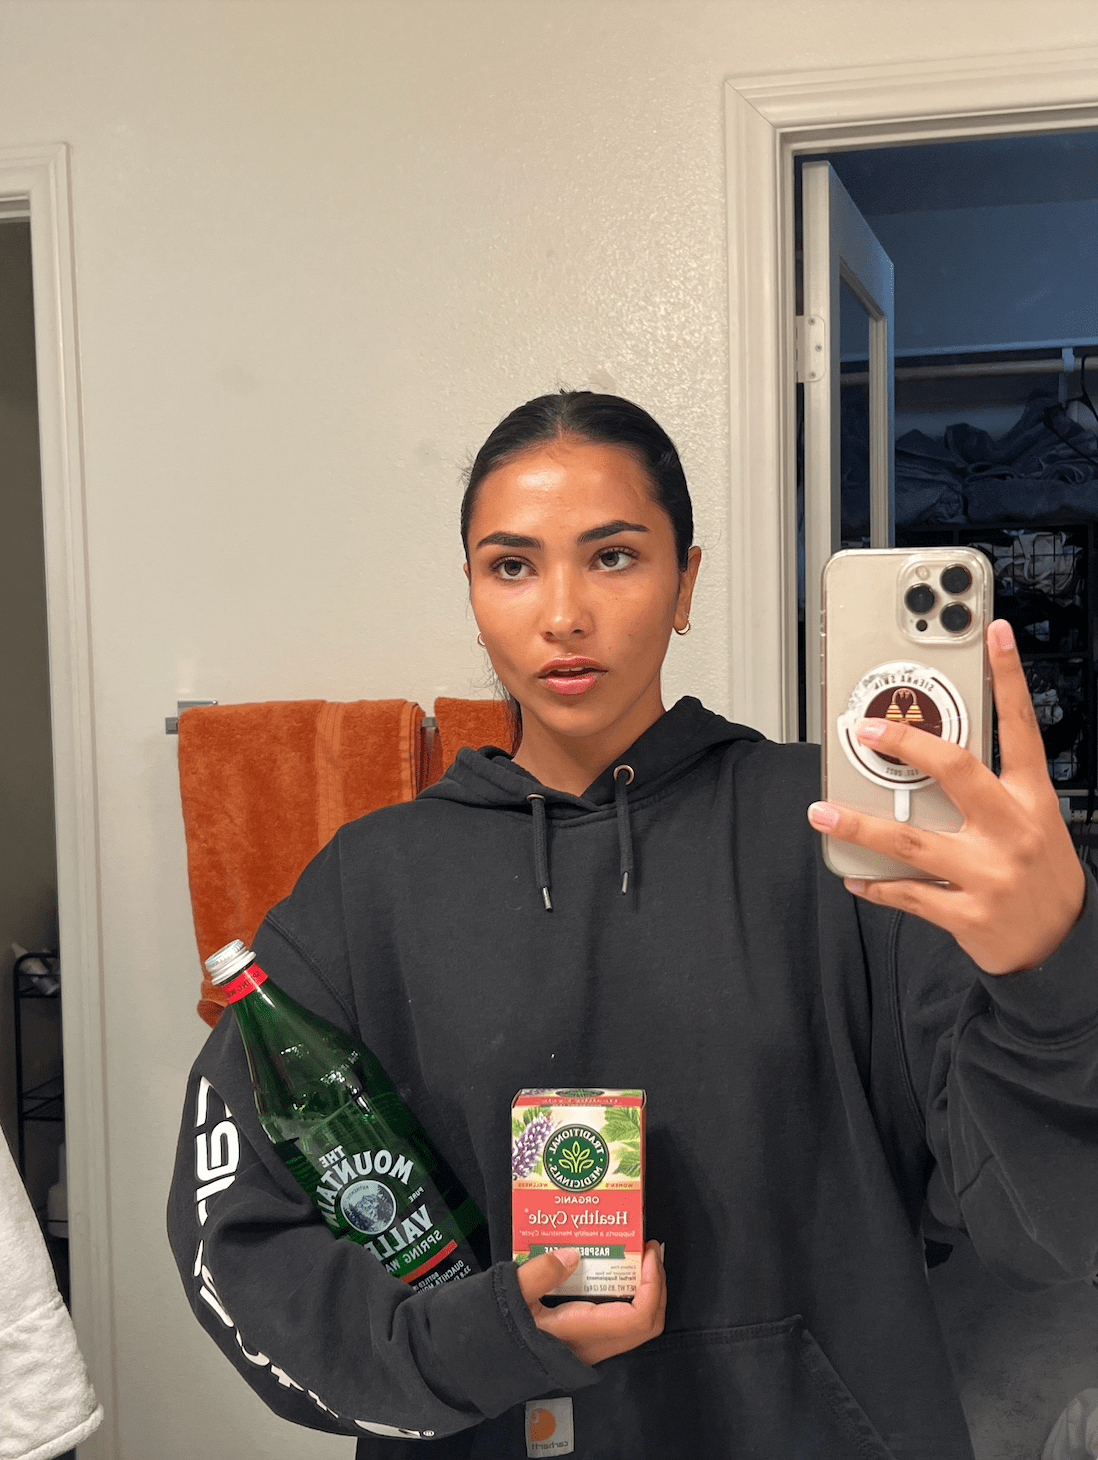 Girl takes mirror selfie with white iPhone 13, wearing a charcoal colored sweatshirt while holding a bottle of mountain valley spring water in her left arm and organic raspberry tea in her left hand